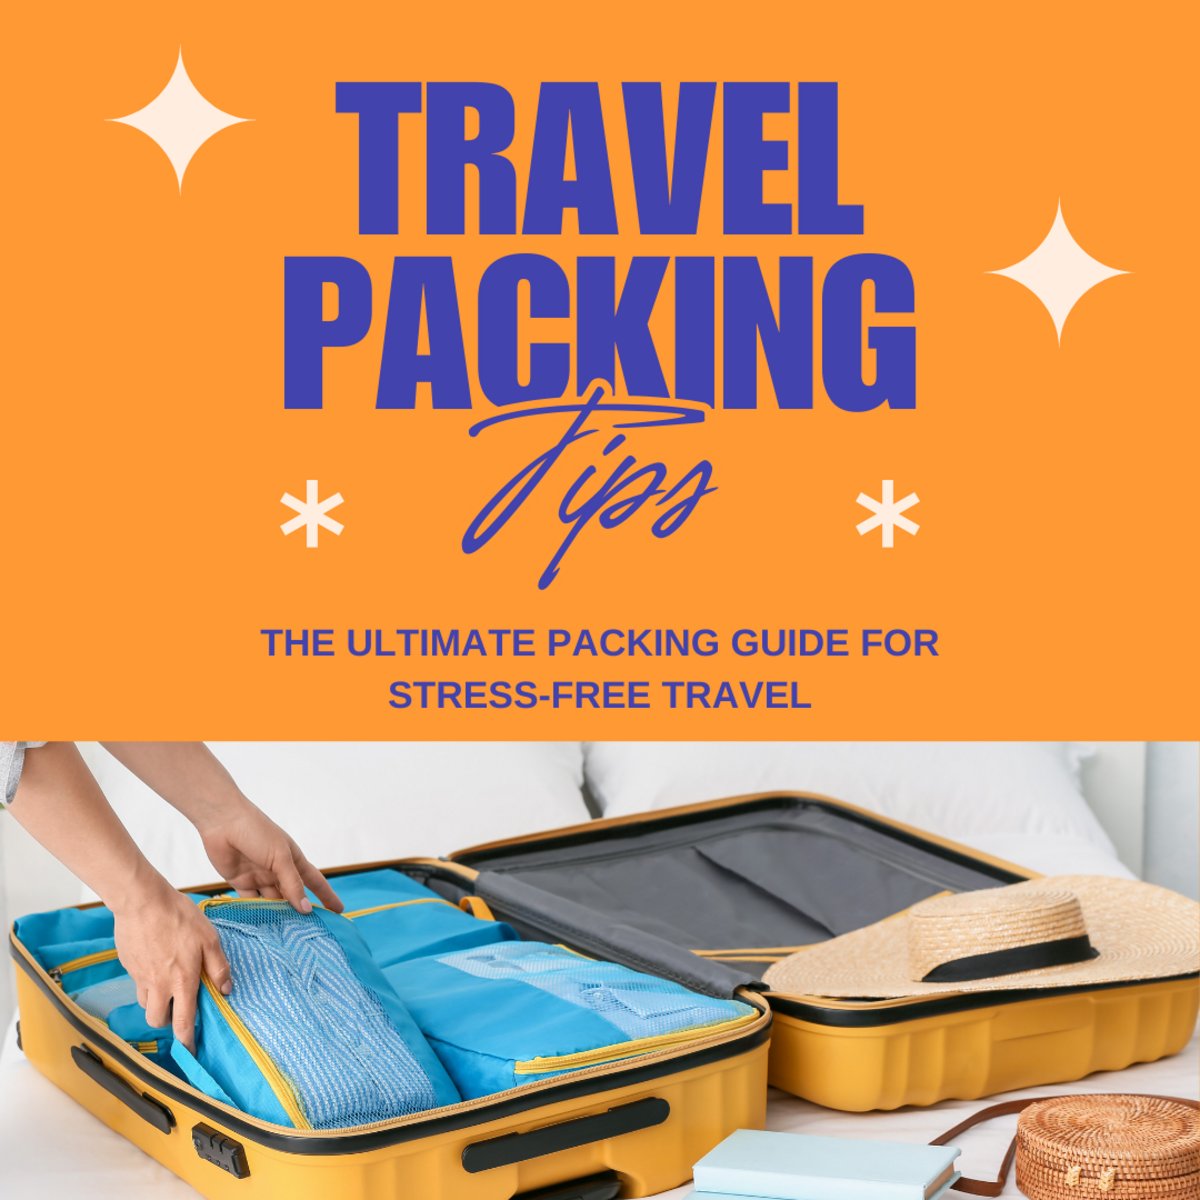 Packing well enhances your  #travelexperience. This helpful guide will set you on the right path to Yakima. bit.ly/49pMmhl